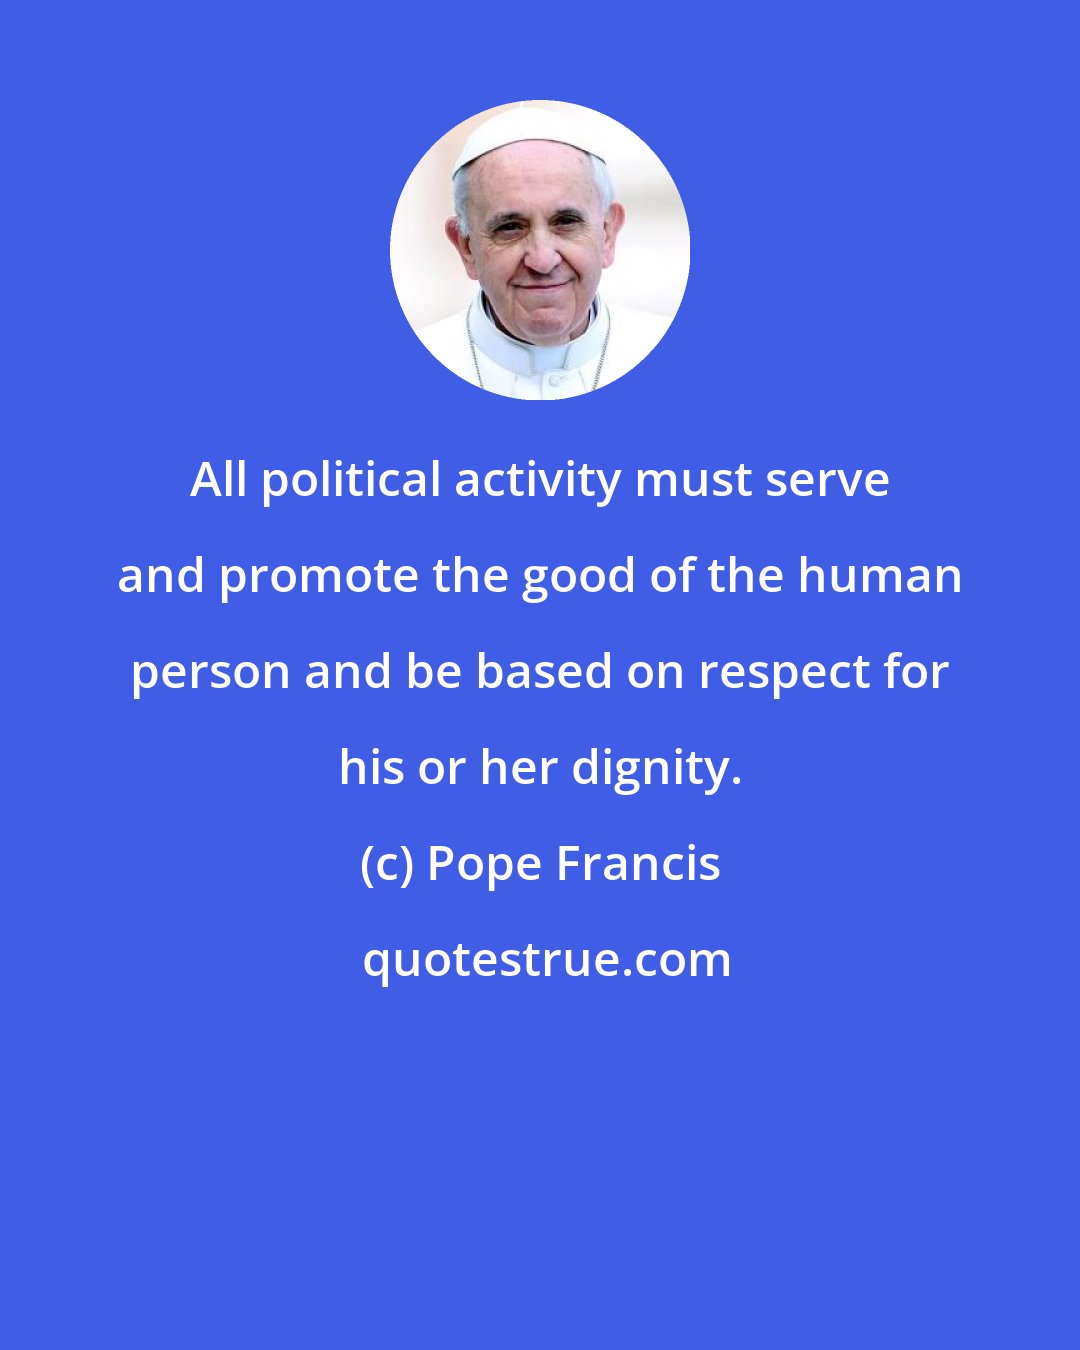 Pope Francis: All political activity must serve and promote the good of the human person and be based on respect for his or her dignity.